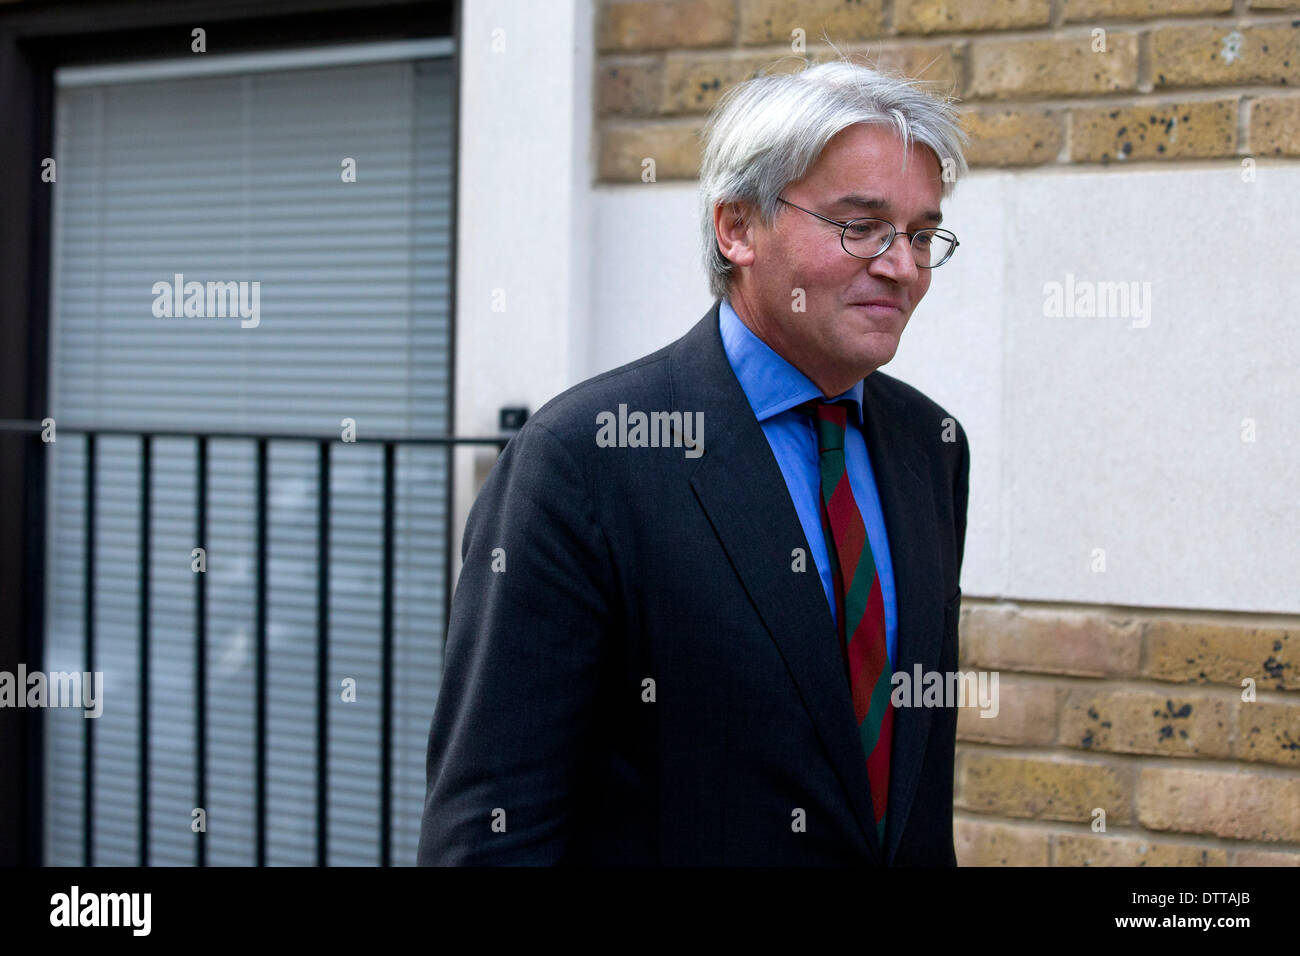 UK, London : Former Conservative Chief Whip Andrew Mitchell MP is pictured in London. Stock Photo